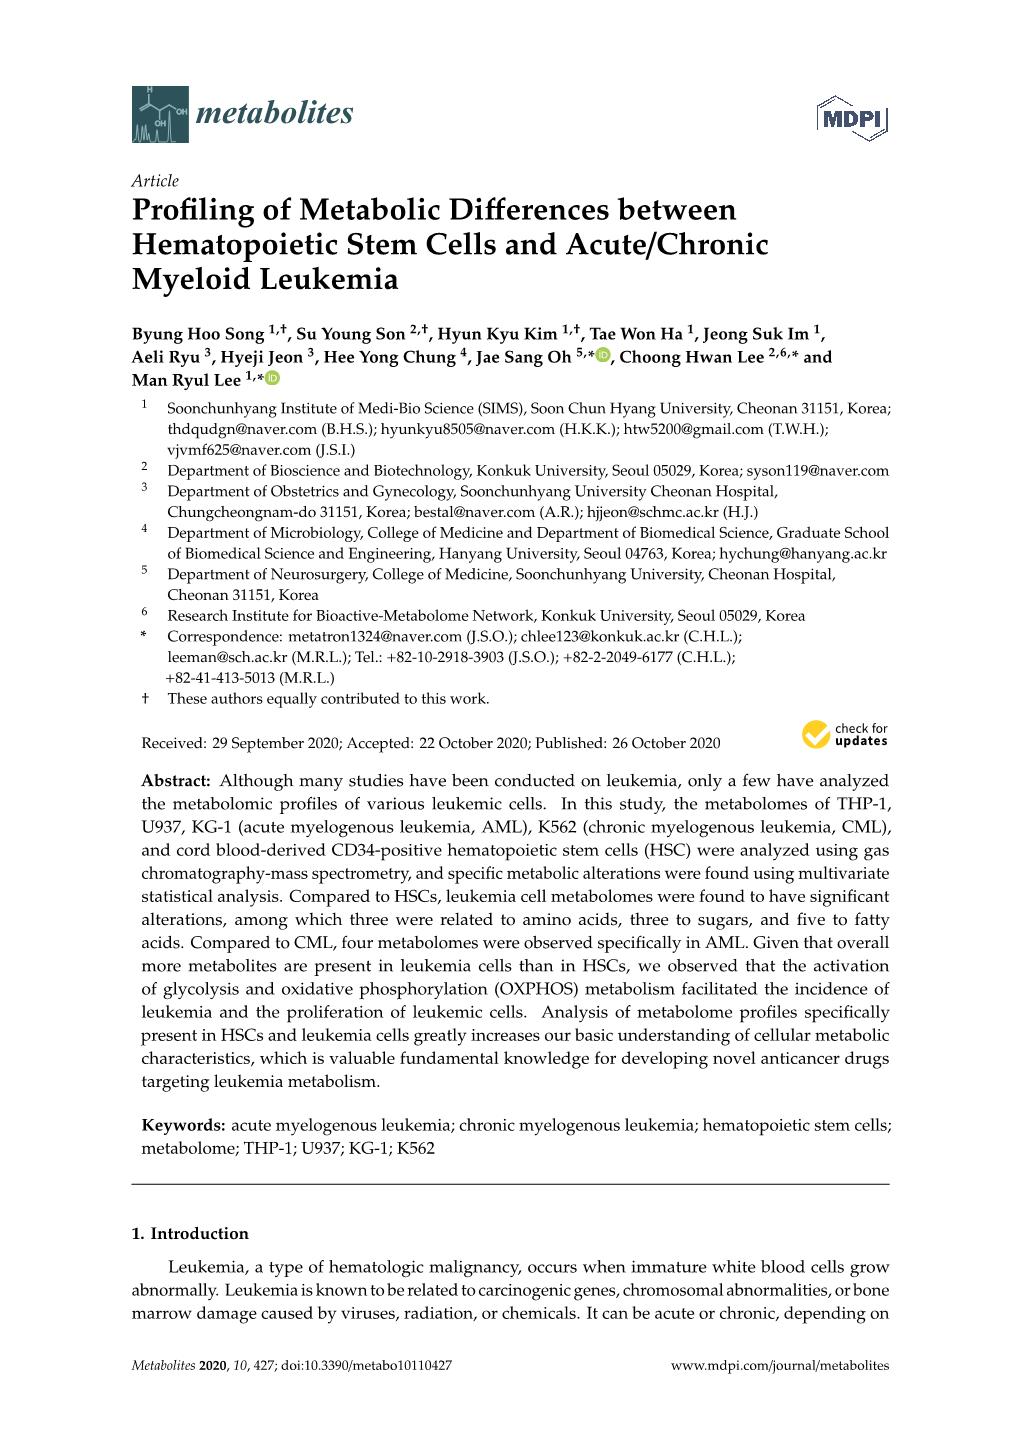 Profiling of Metabolic Differences Between Hematopoietic Stem Cells